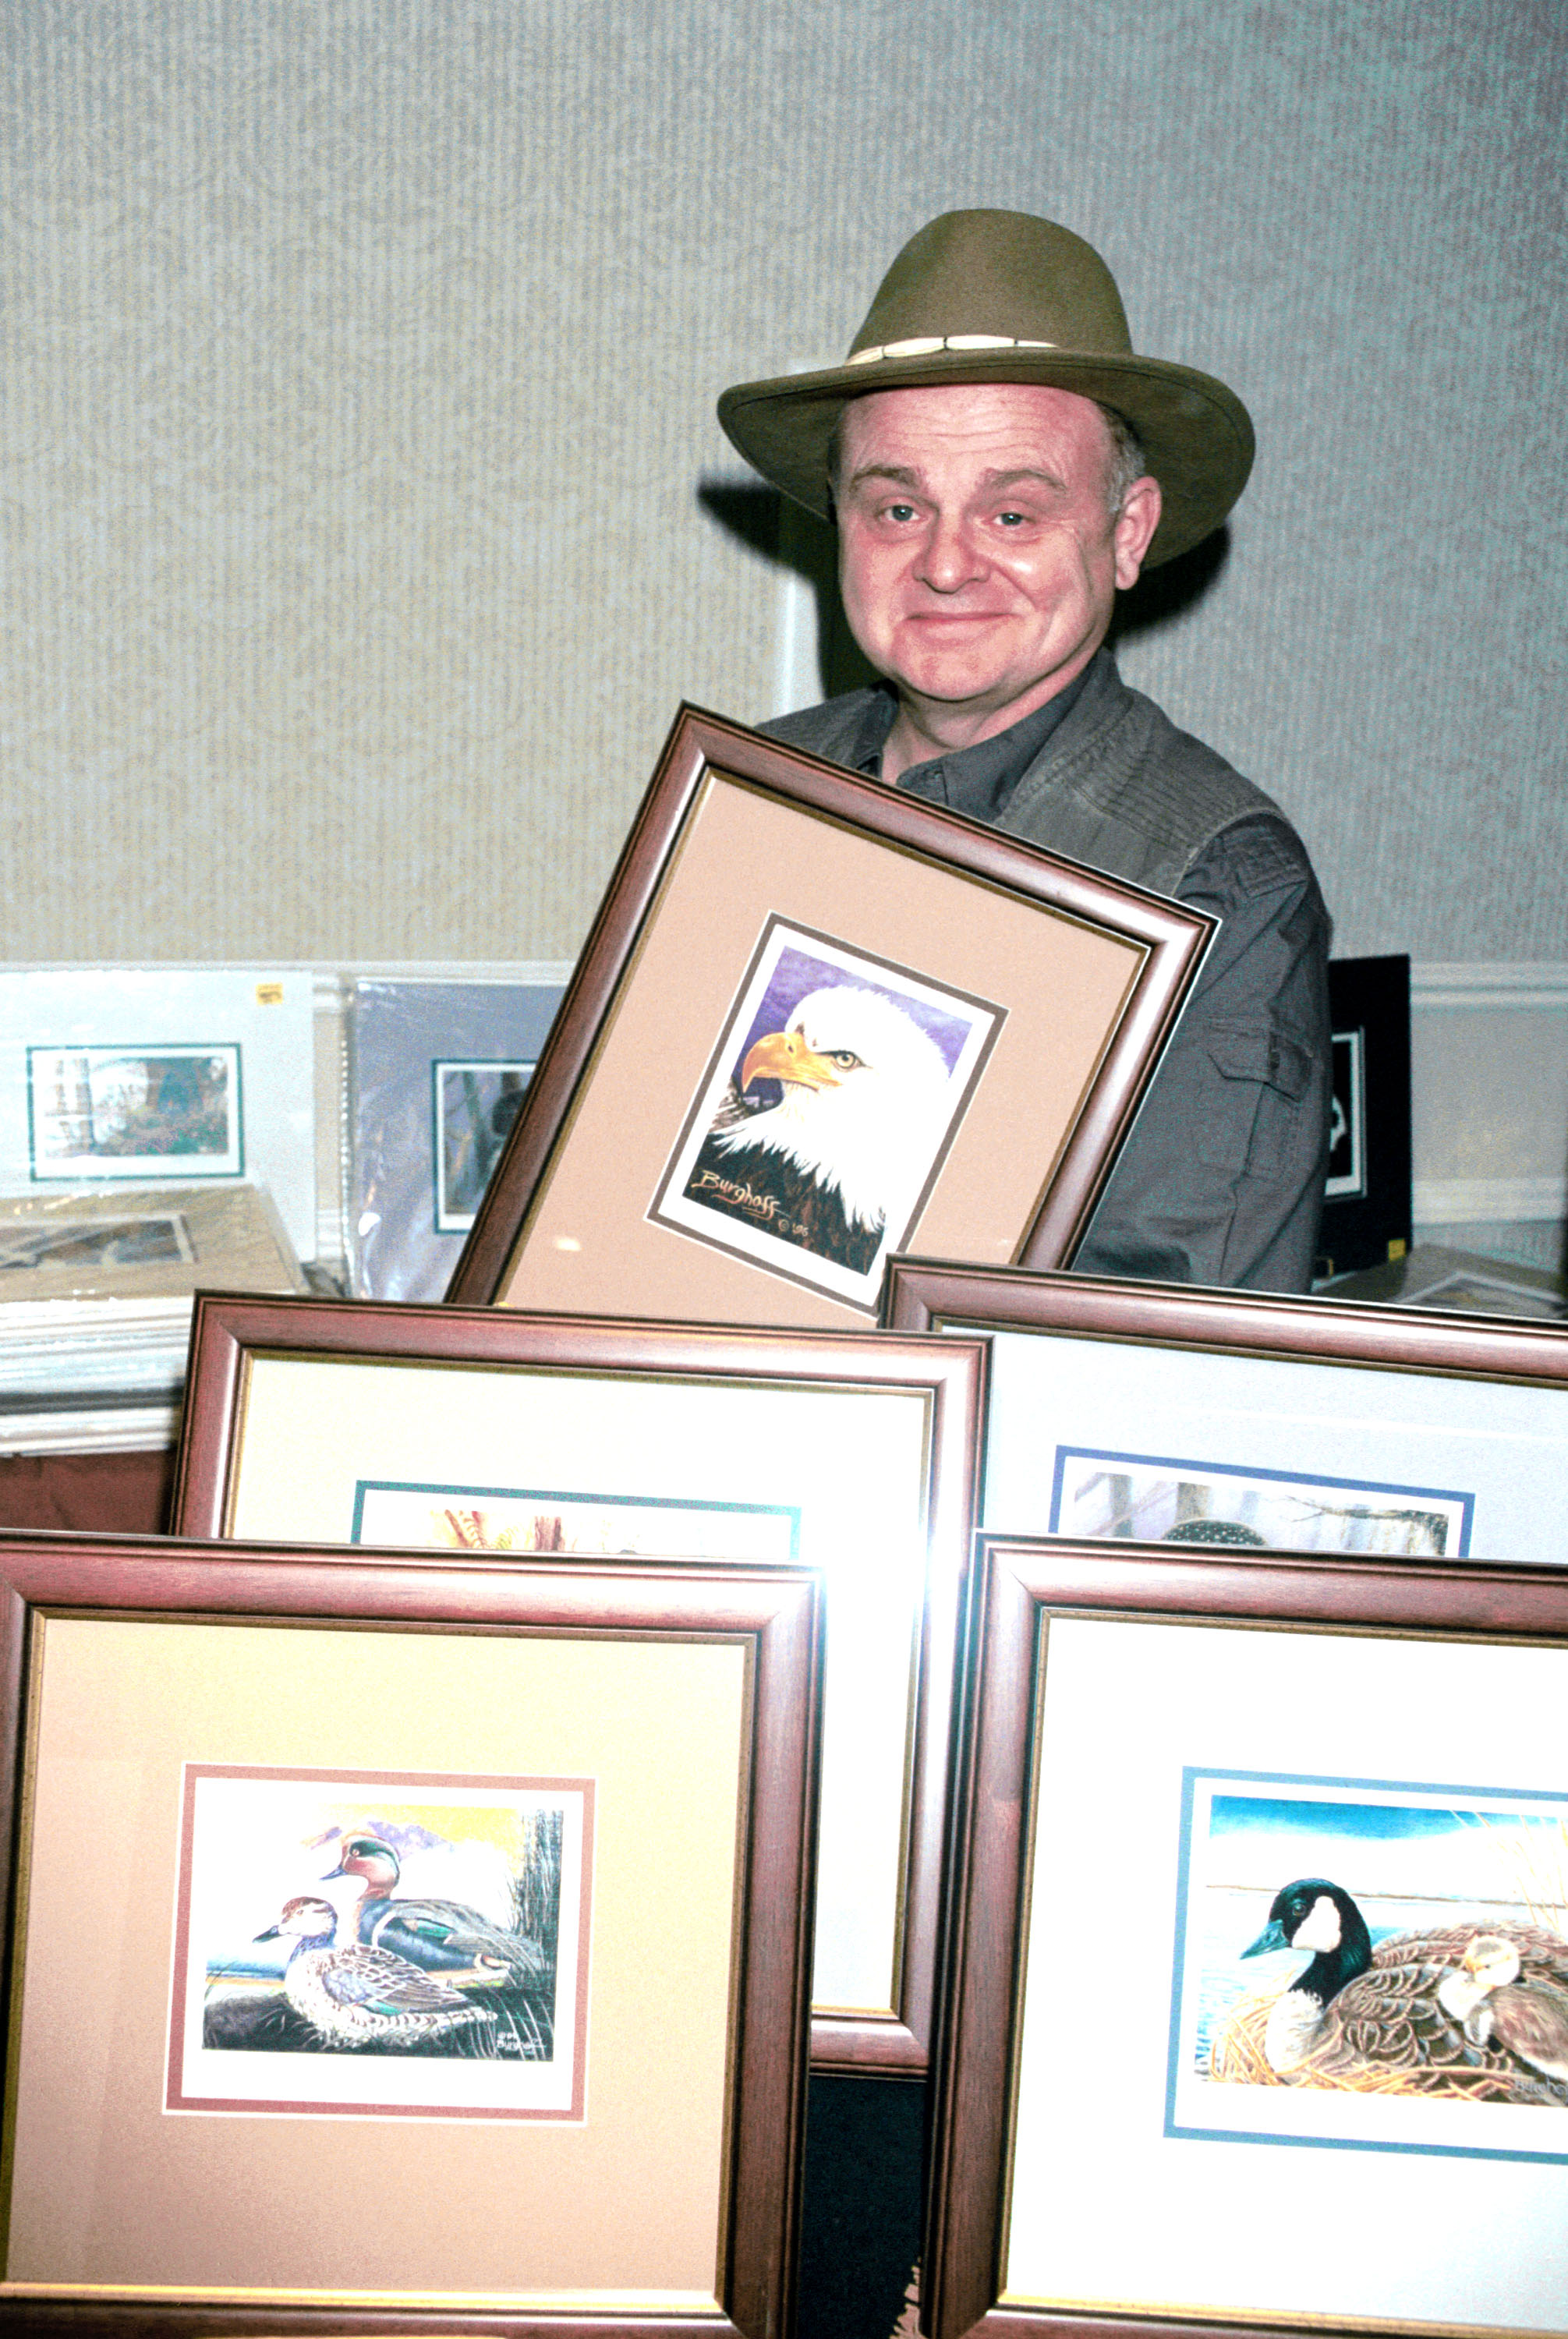 Gary Burghoff attends the "Hollywood Collectors and Celebrities Show" April 7, 2001, in North Hollywood | Source: Getty Images